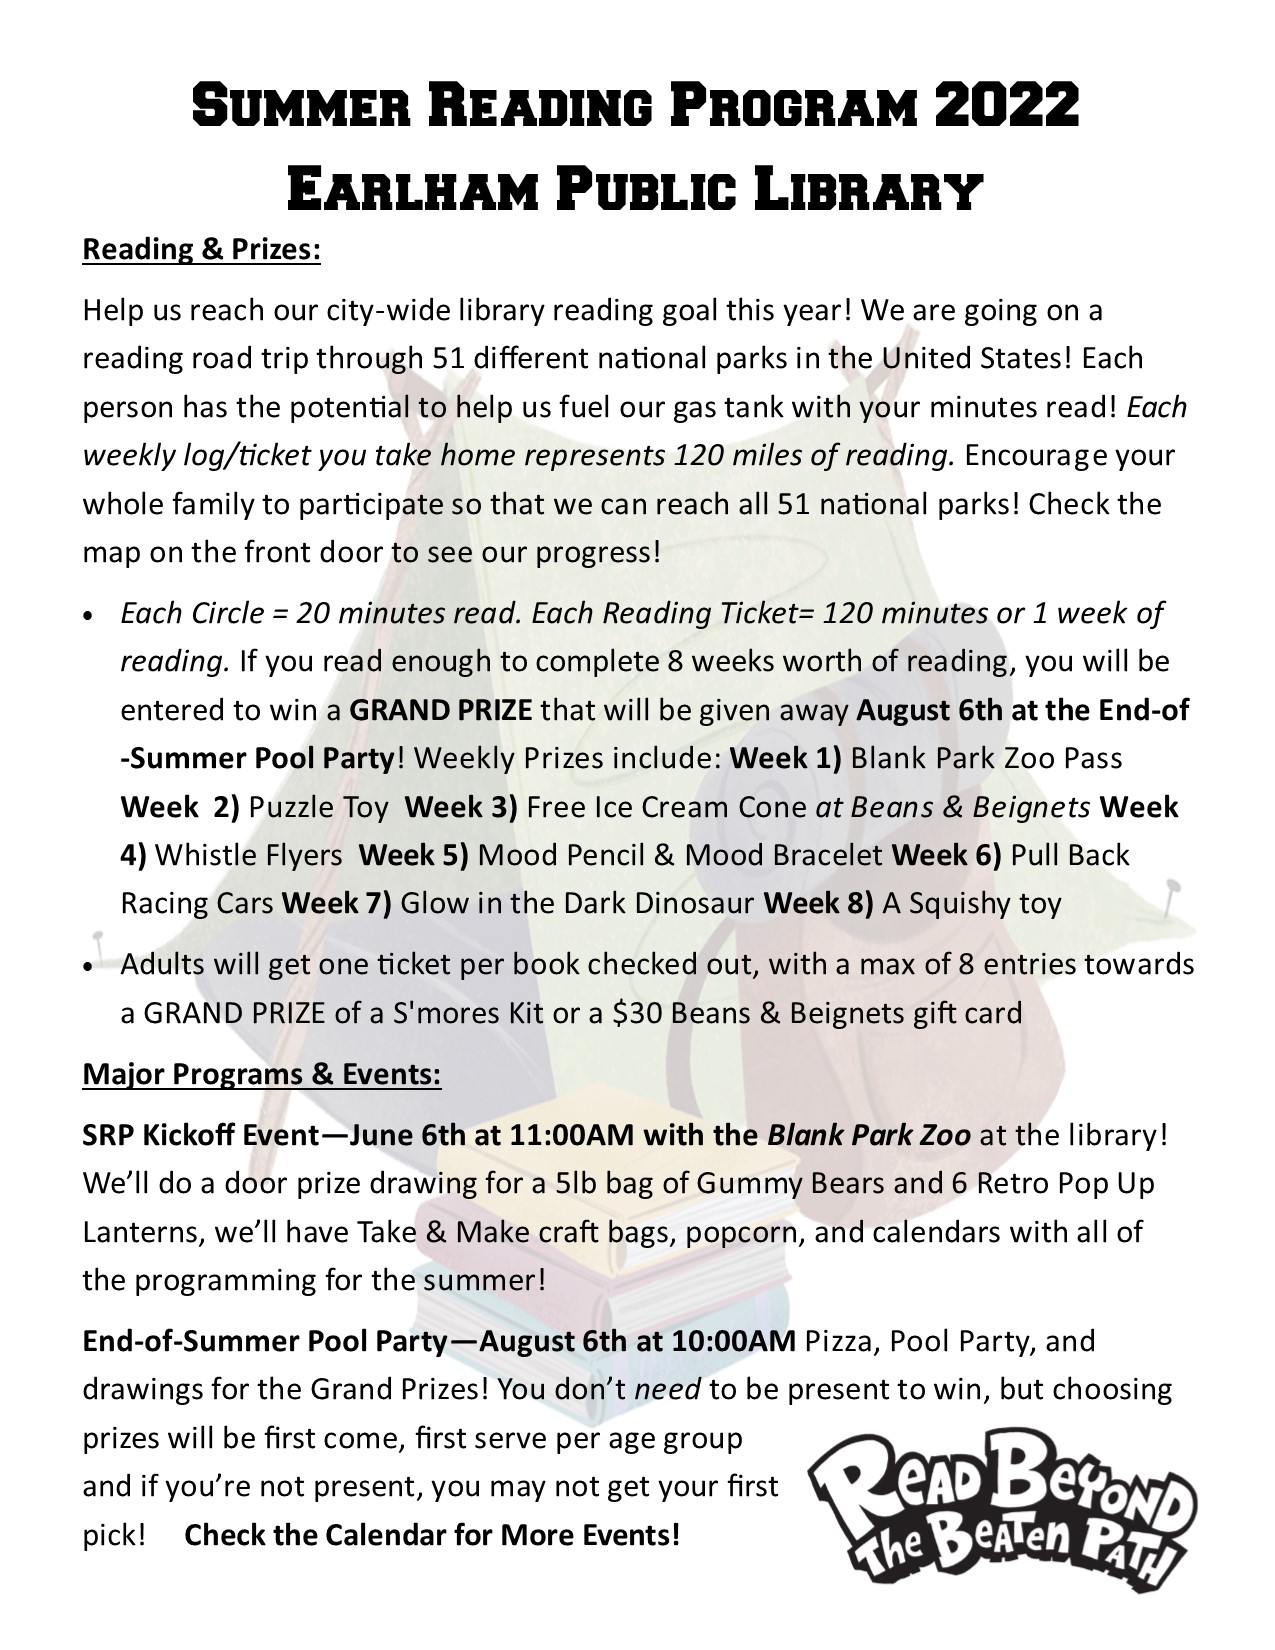 flyer with all Summer Reading Program information